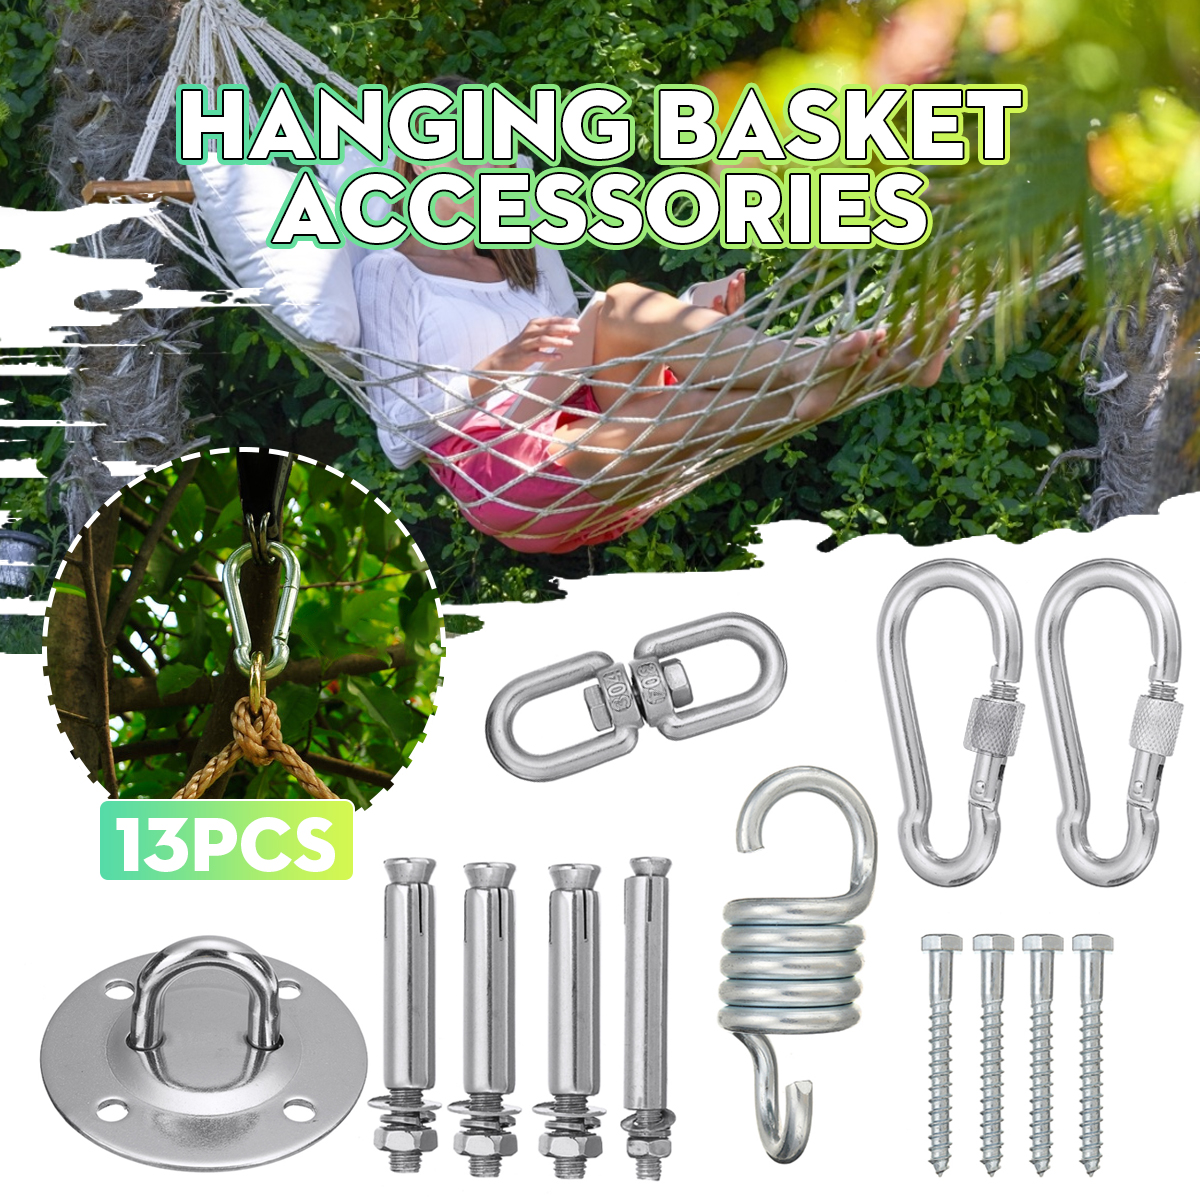 13Pcs-Hammock-Chair-Hanging-Basket-Accessories-Stainless-Steel-Fixed-Buckles-1782407-2